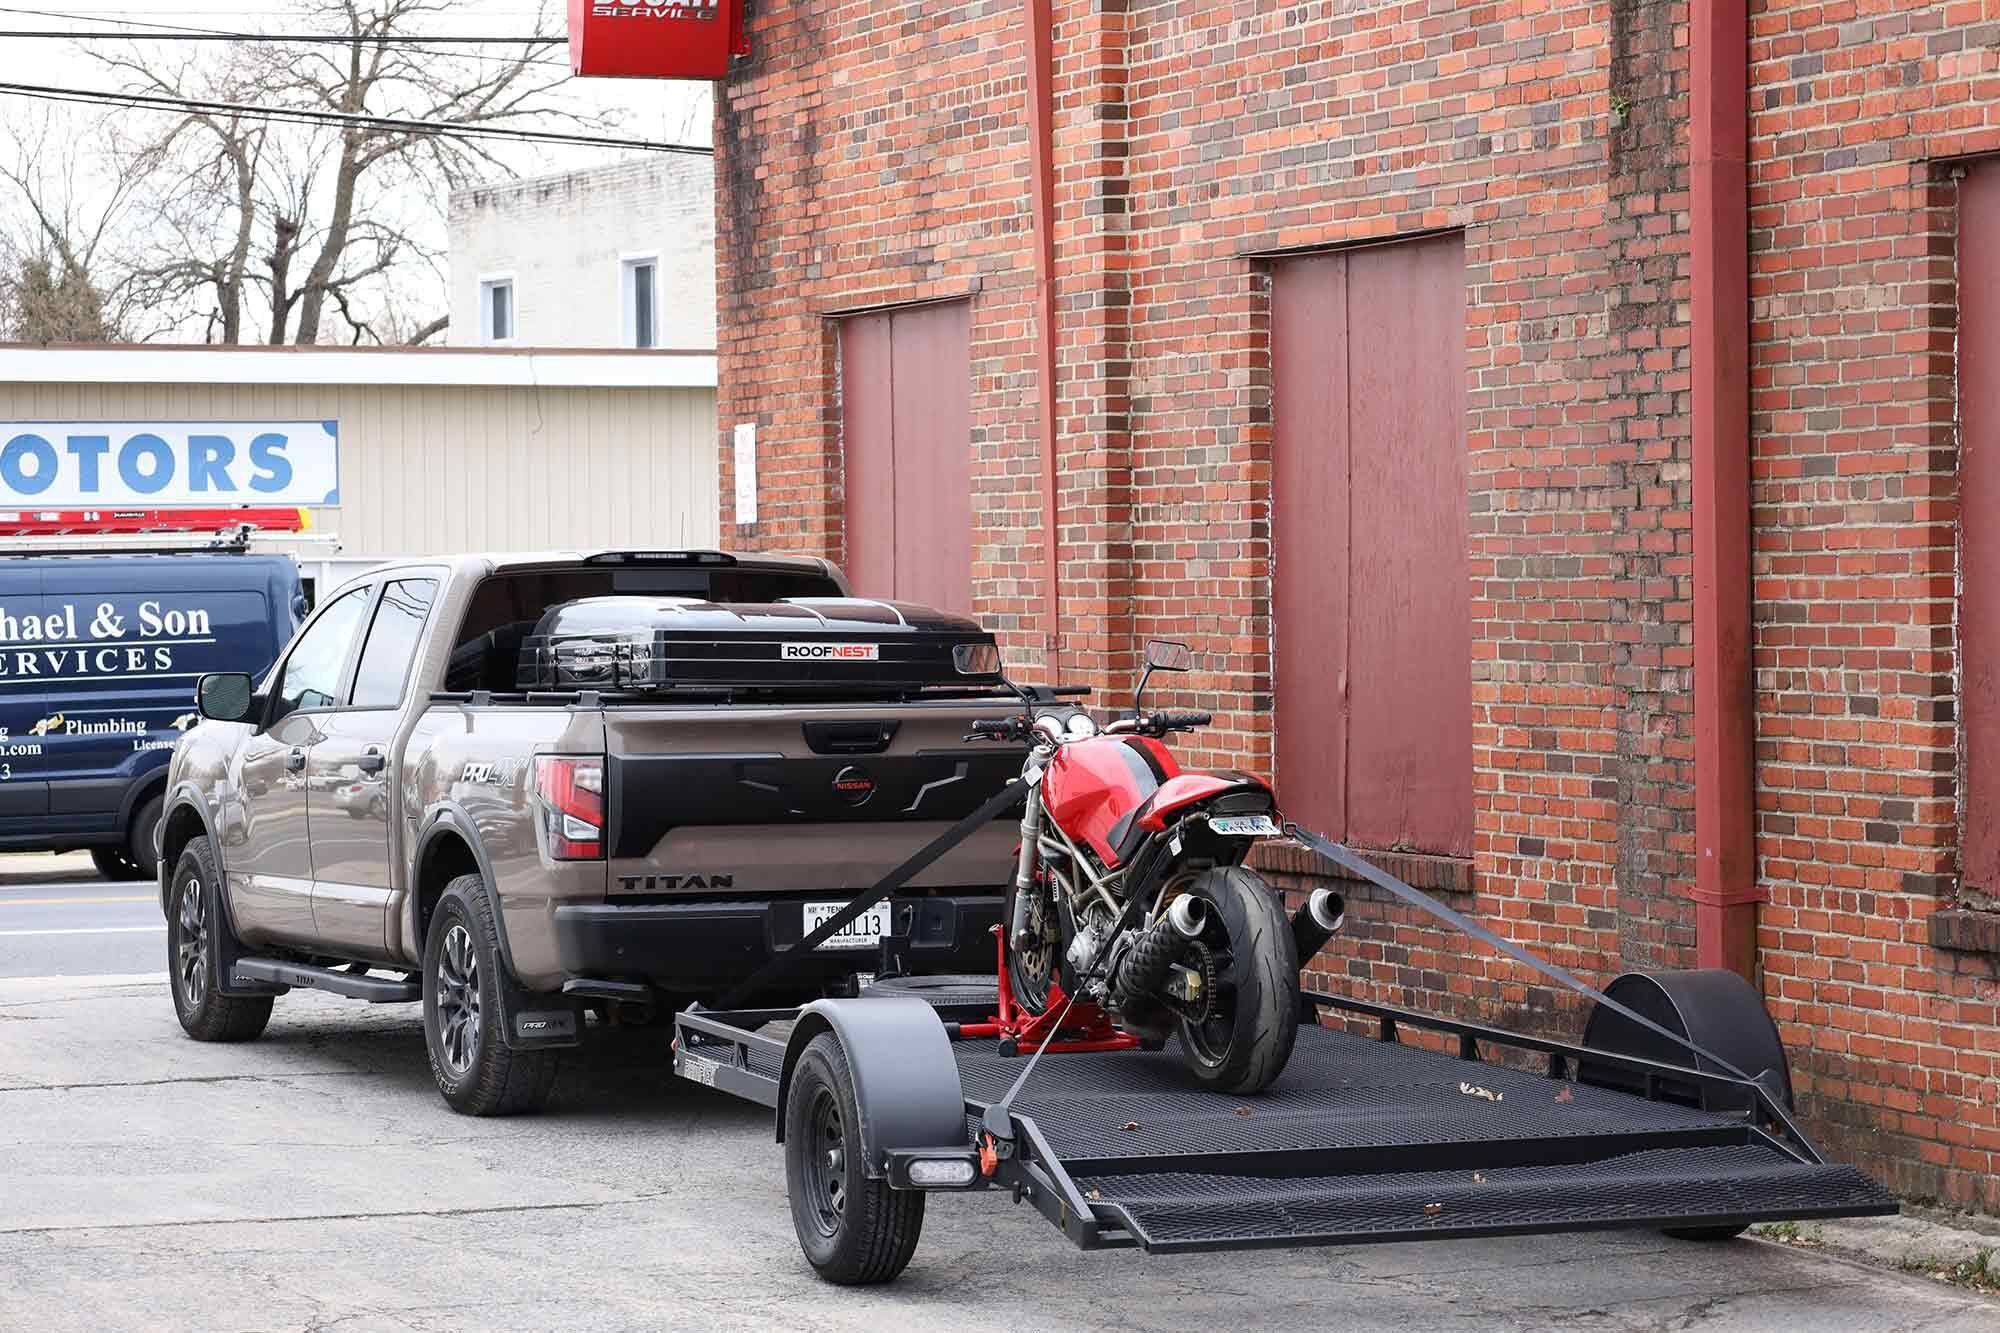 We’ve sicced our Titan on all sorts of towing duty, even when it meant towing something other than a side-by-side. Here, the big beast is picking up my Ducati from its winter service.